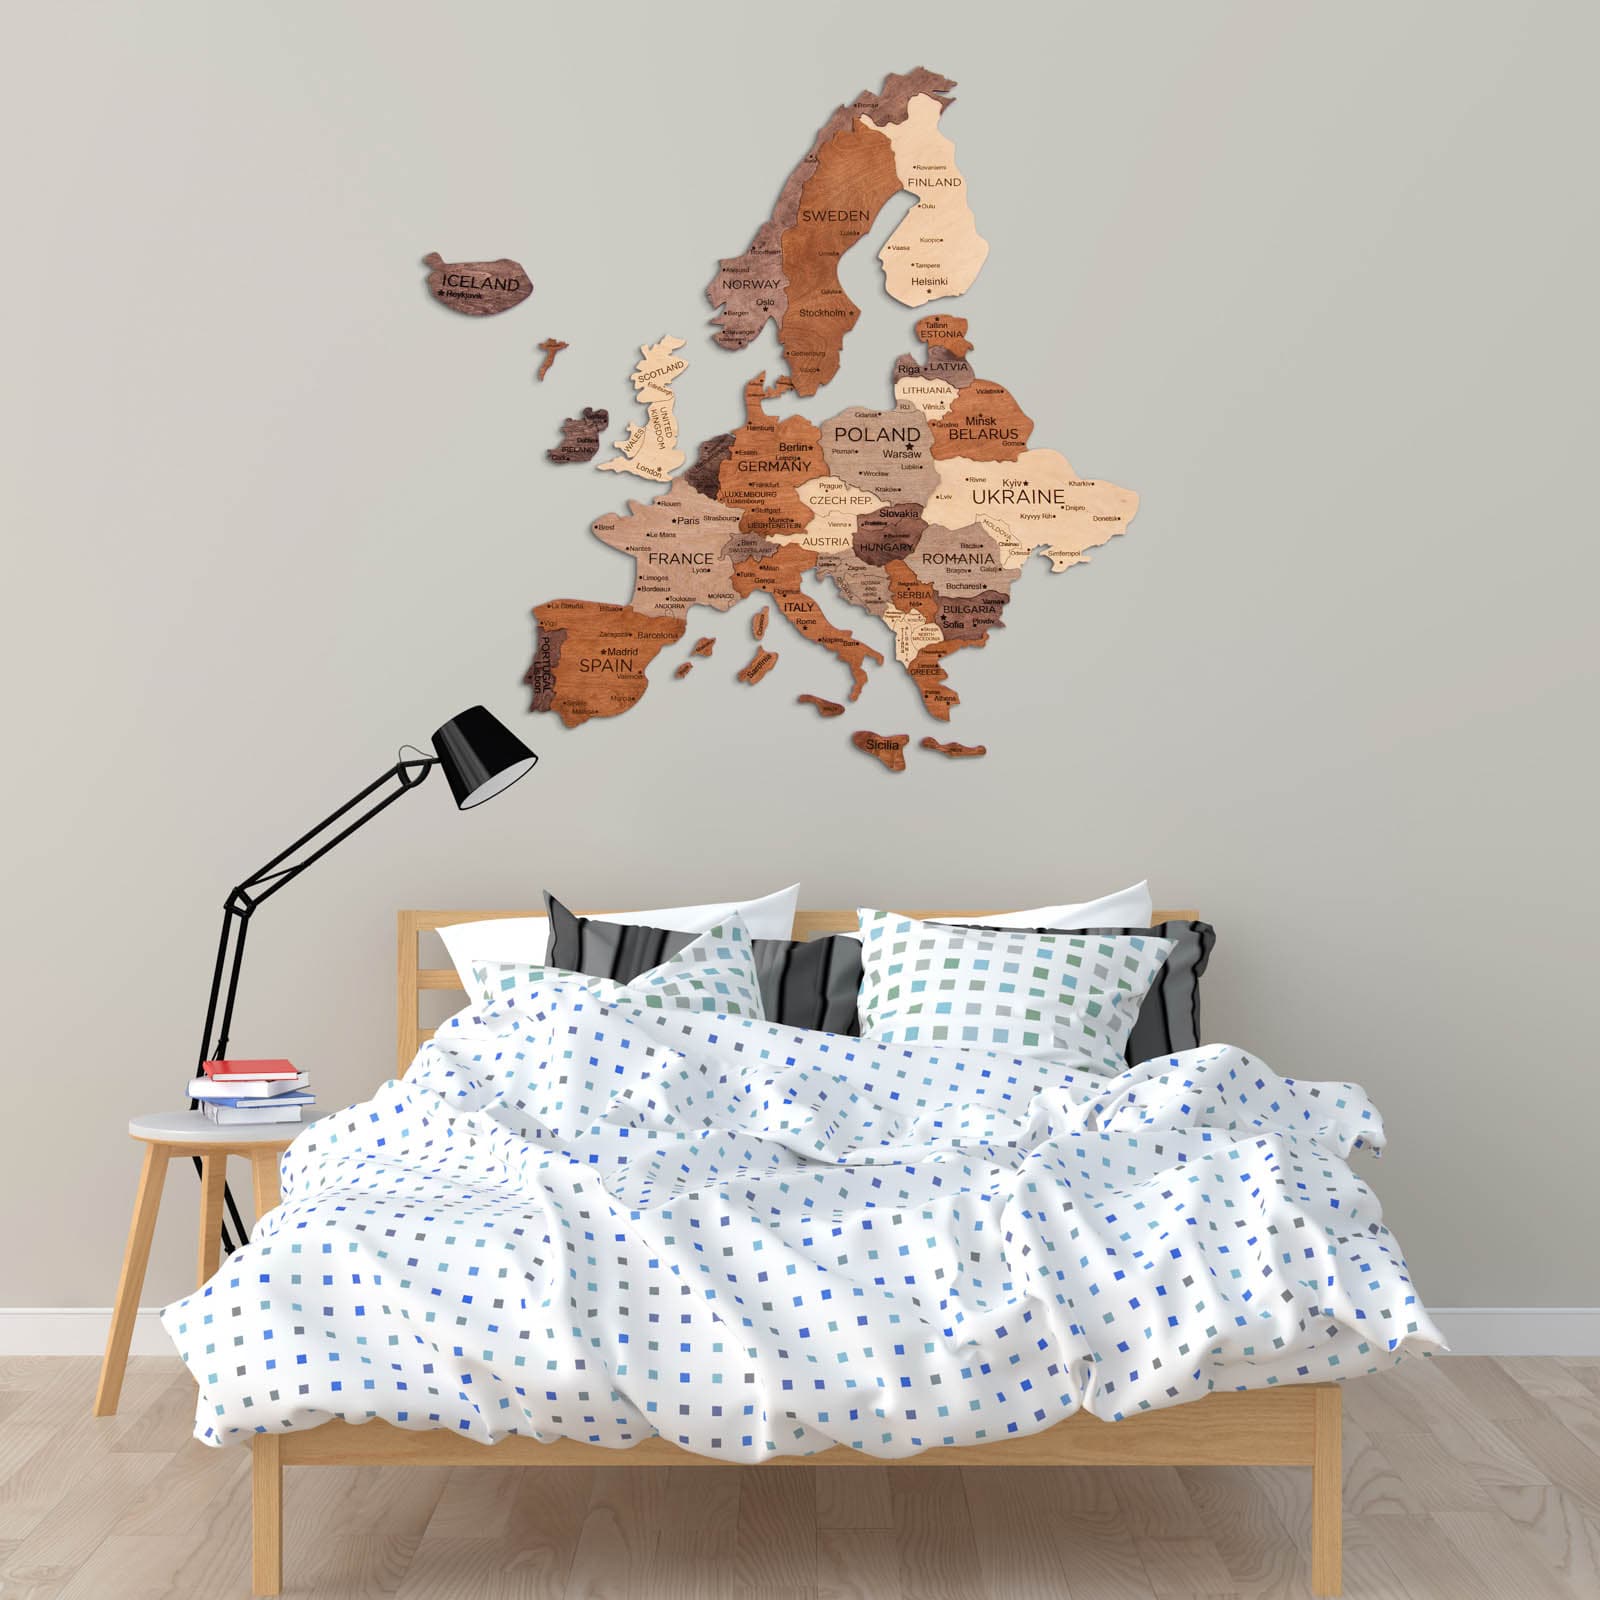 3D Europe Wooden Map Multicolor by Enjoy The Wood 